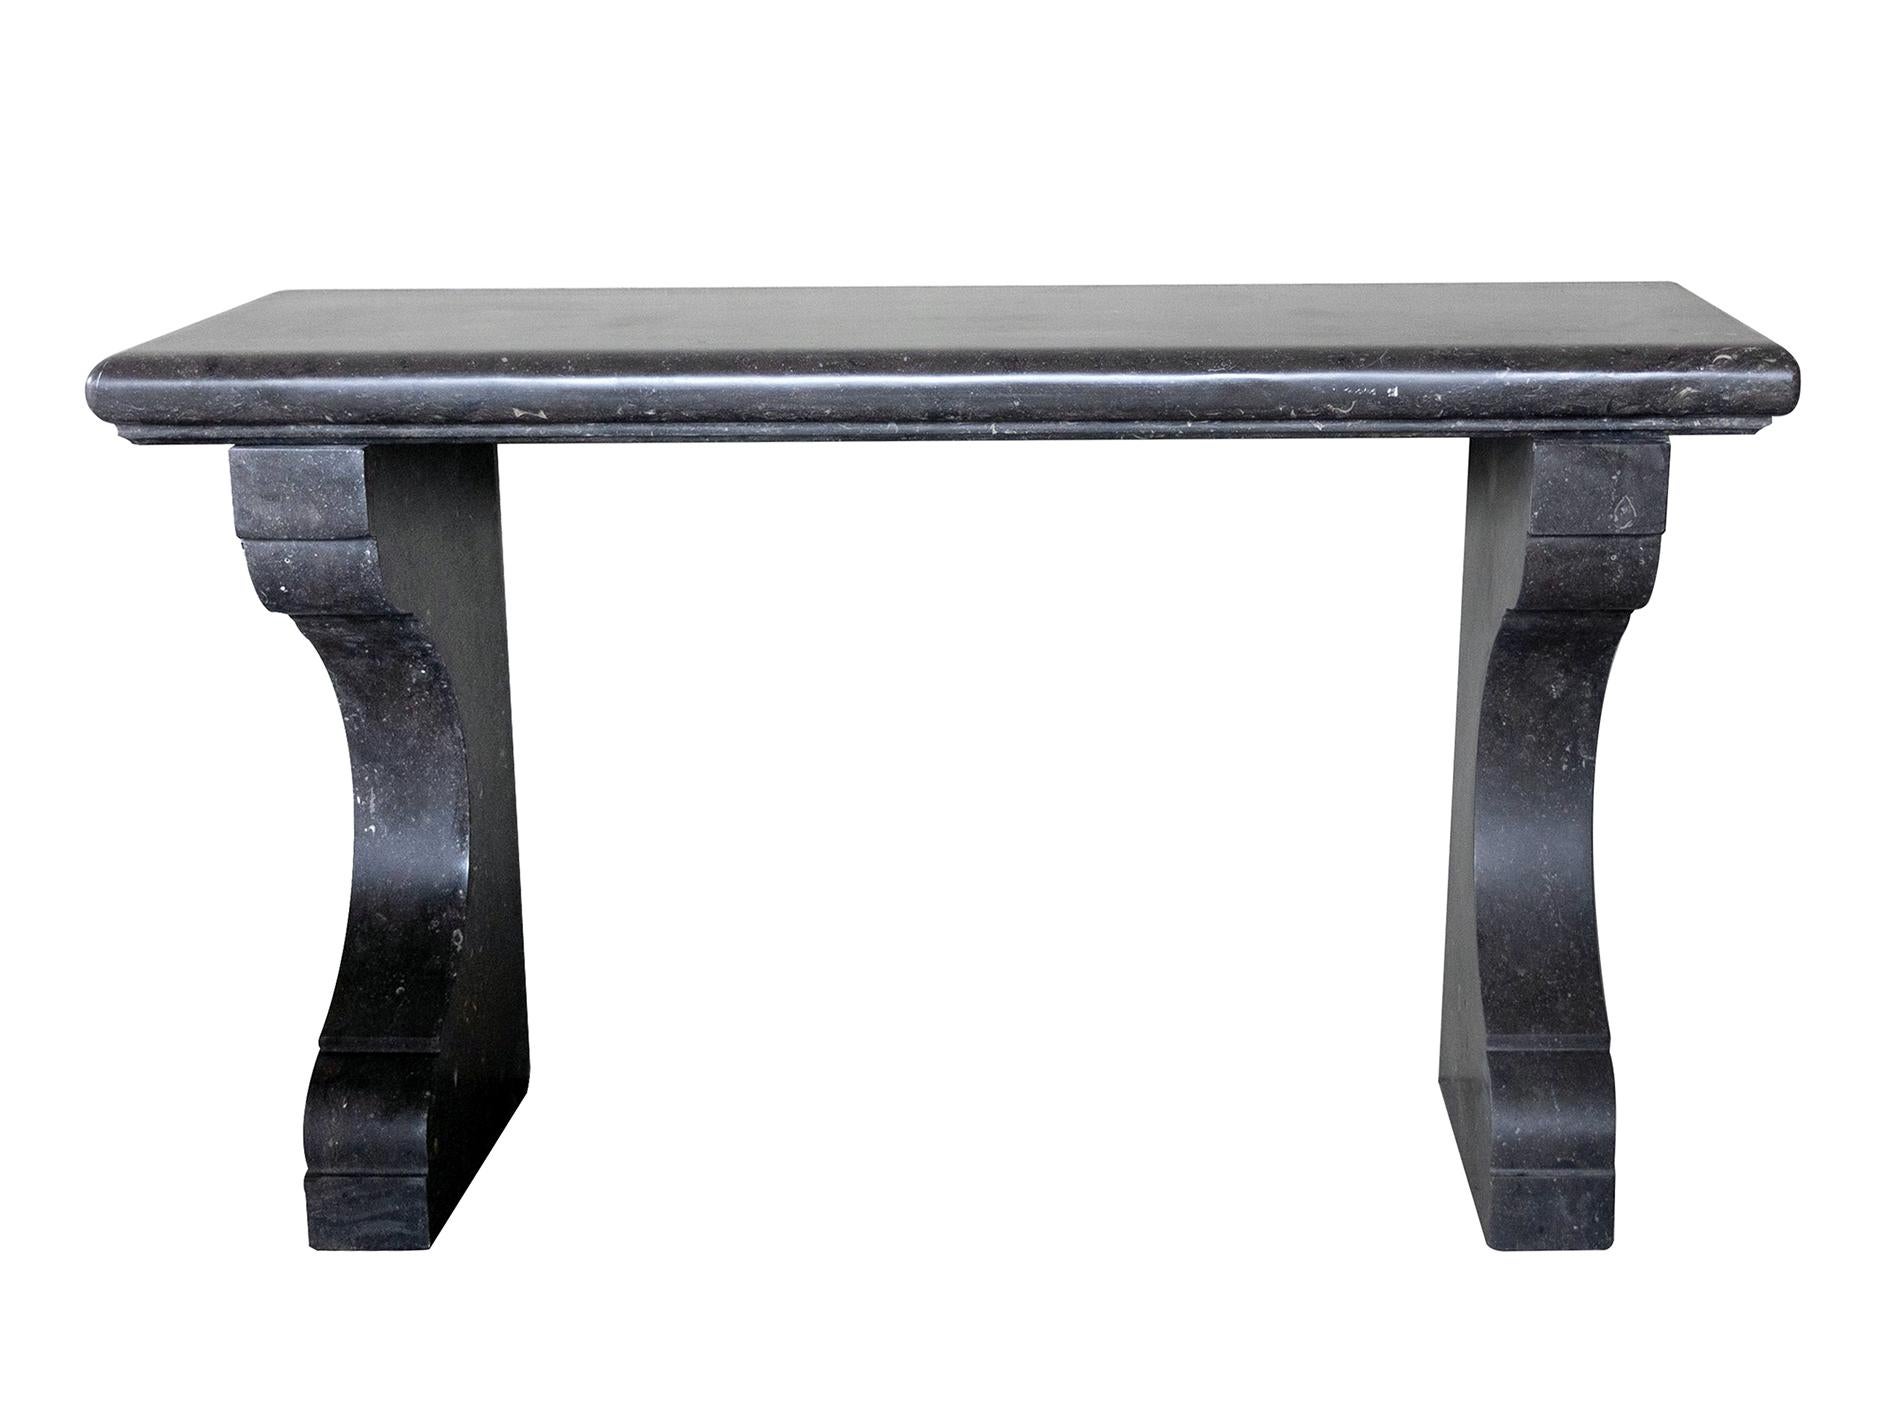 Made from Belgian bluestone with a honed finish and embedded with fossils, the console table is comprised of a thick rectangular top with ogee edge all raised on scrolled concave supports. New with only minimal wear expected; table is ideal for